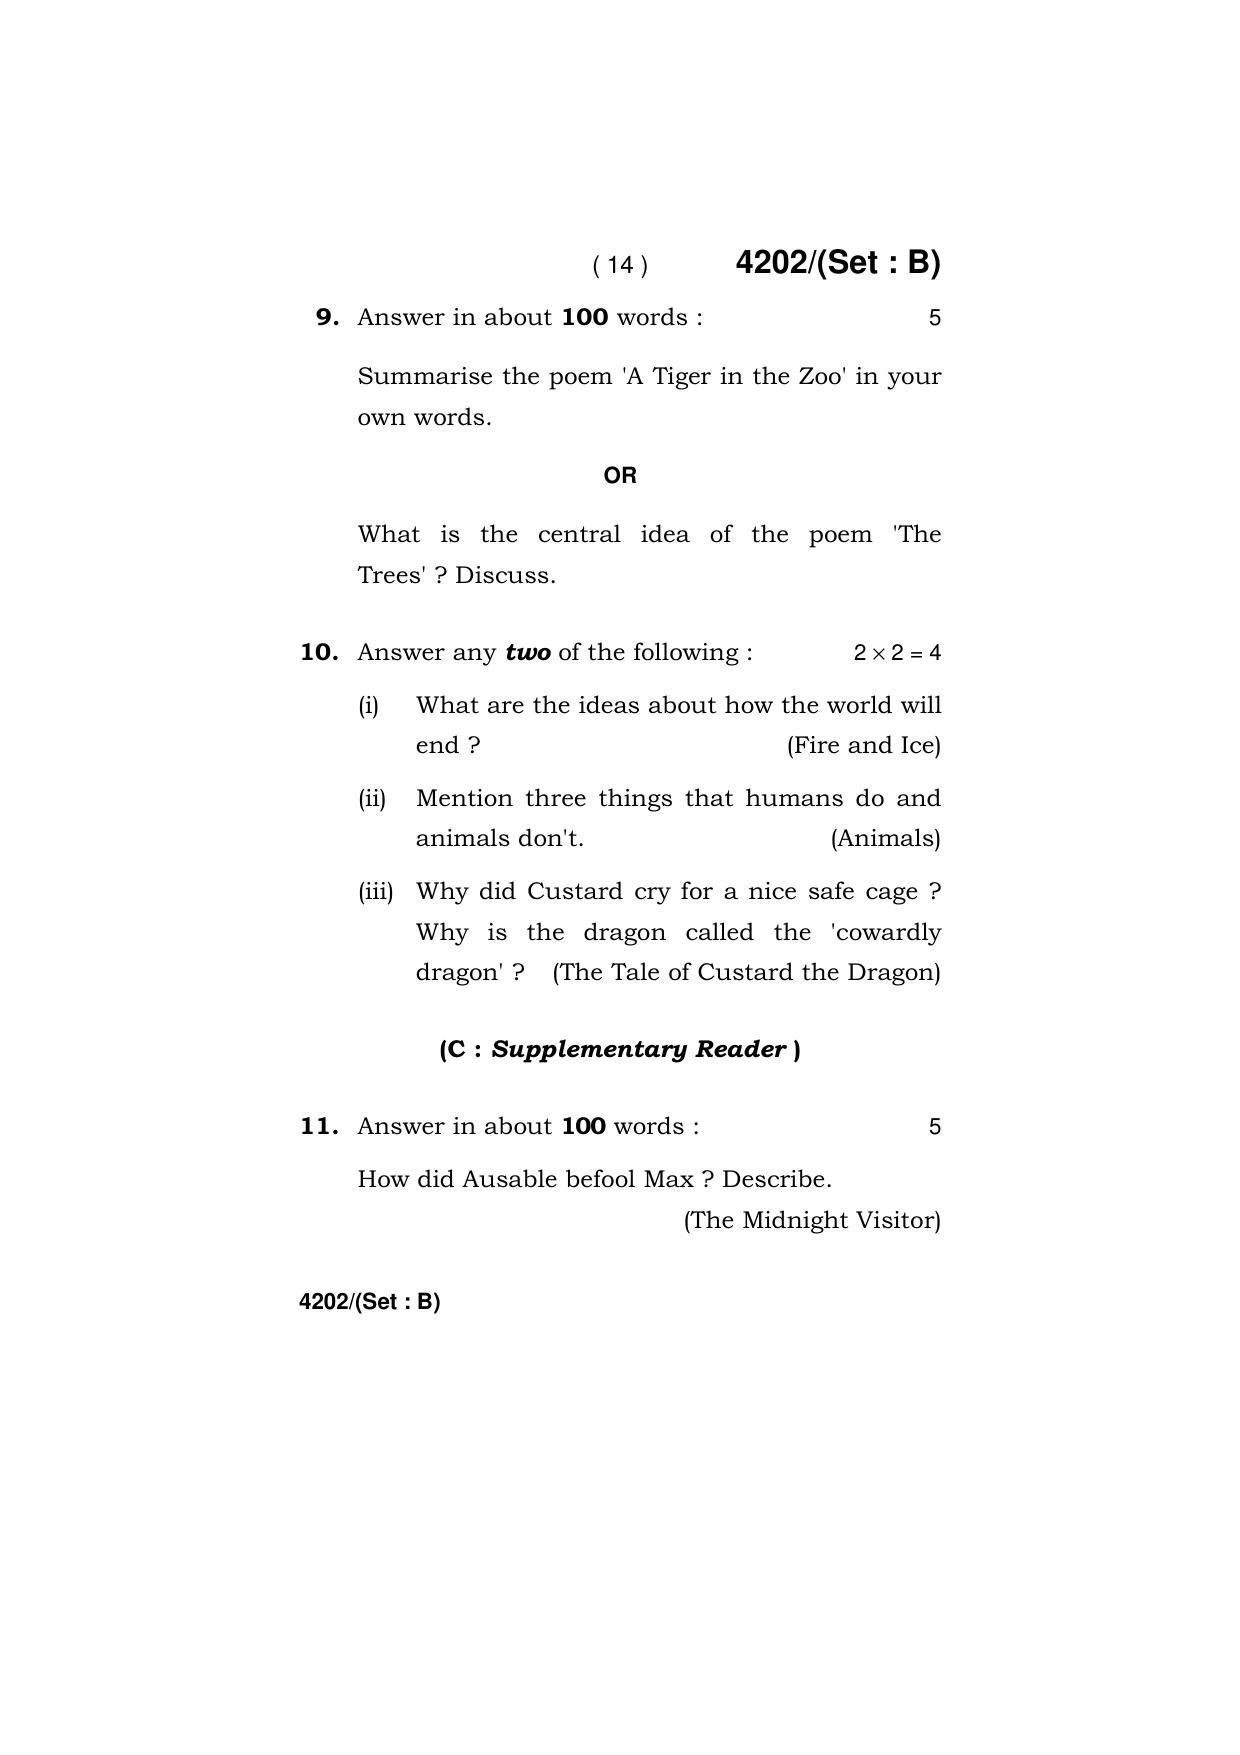 Haryana Board HBSE Class 10 English (All Set) 2019 Question Paper - Page 30